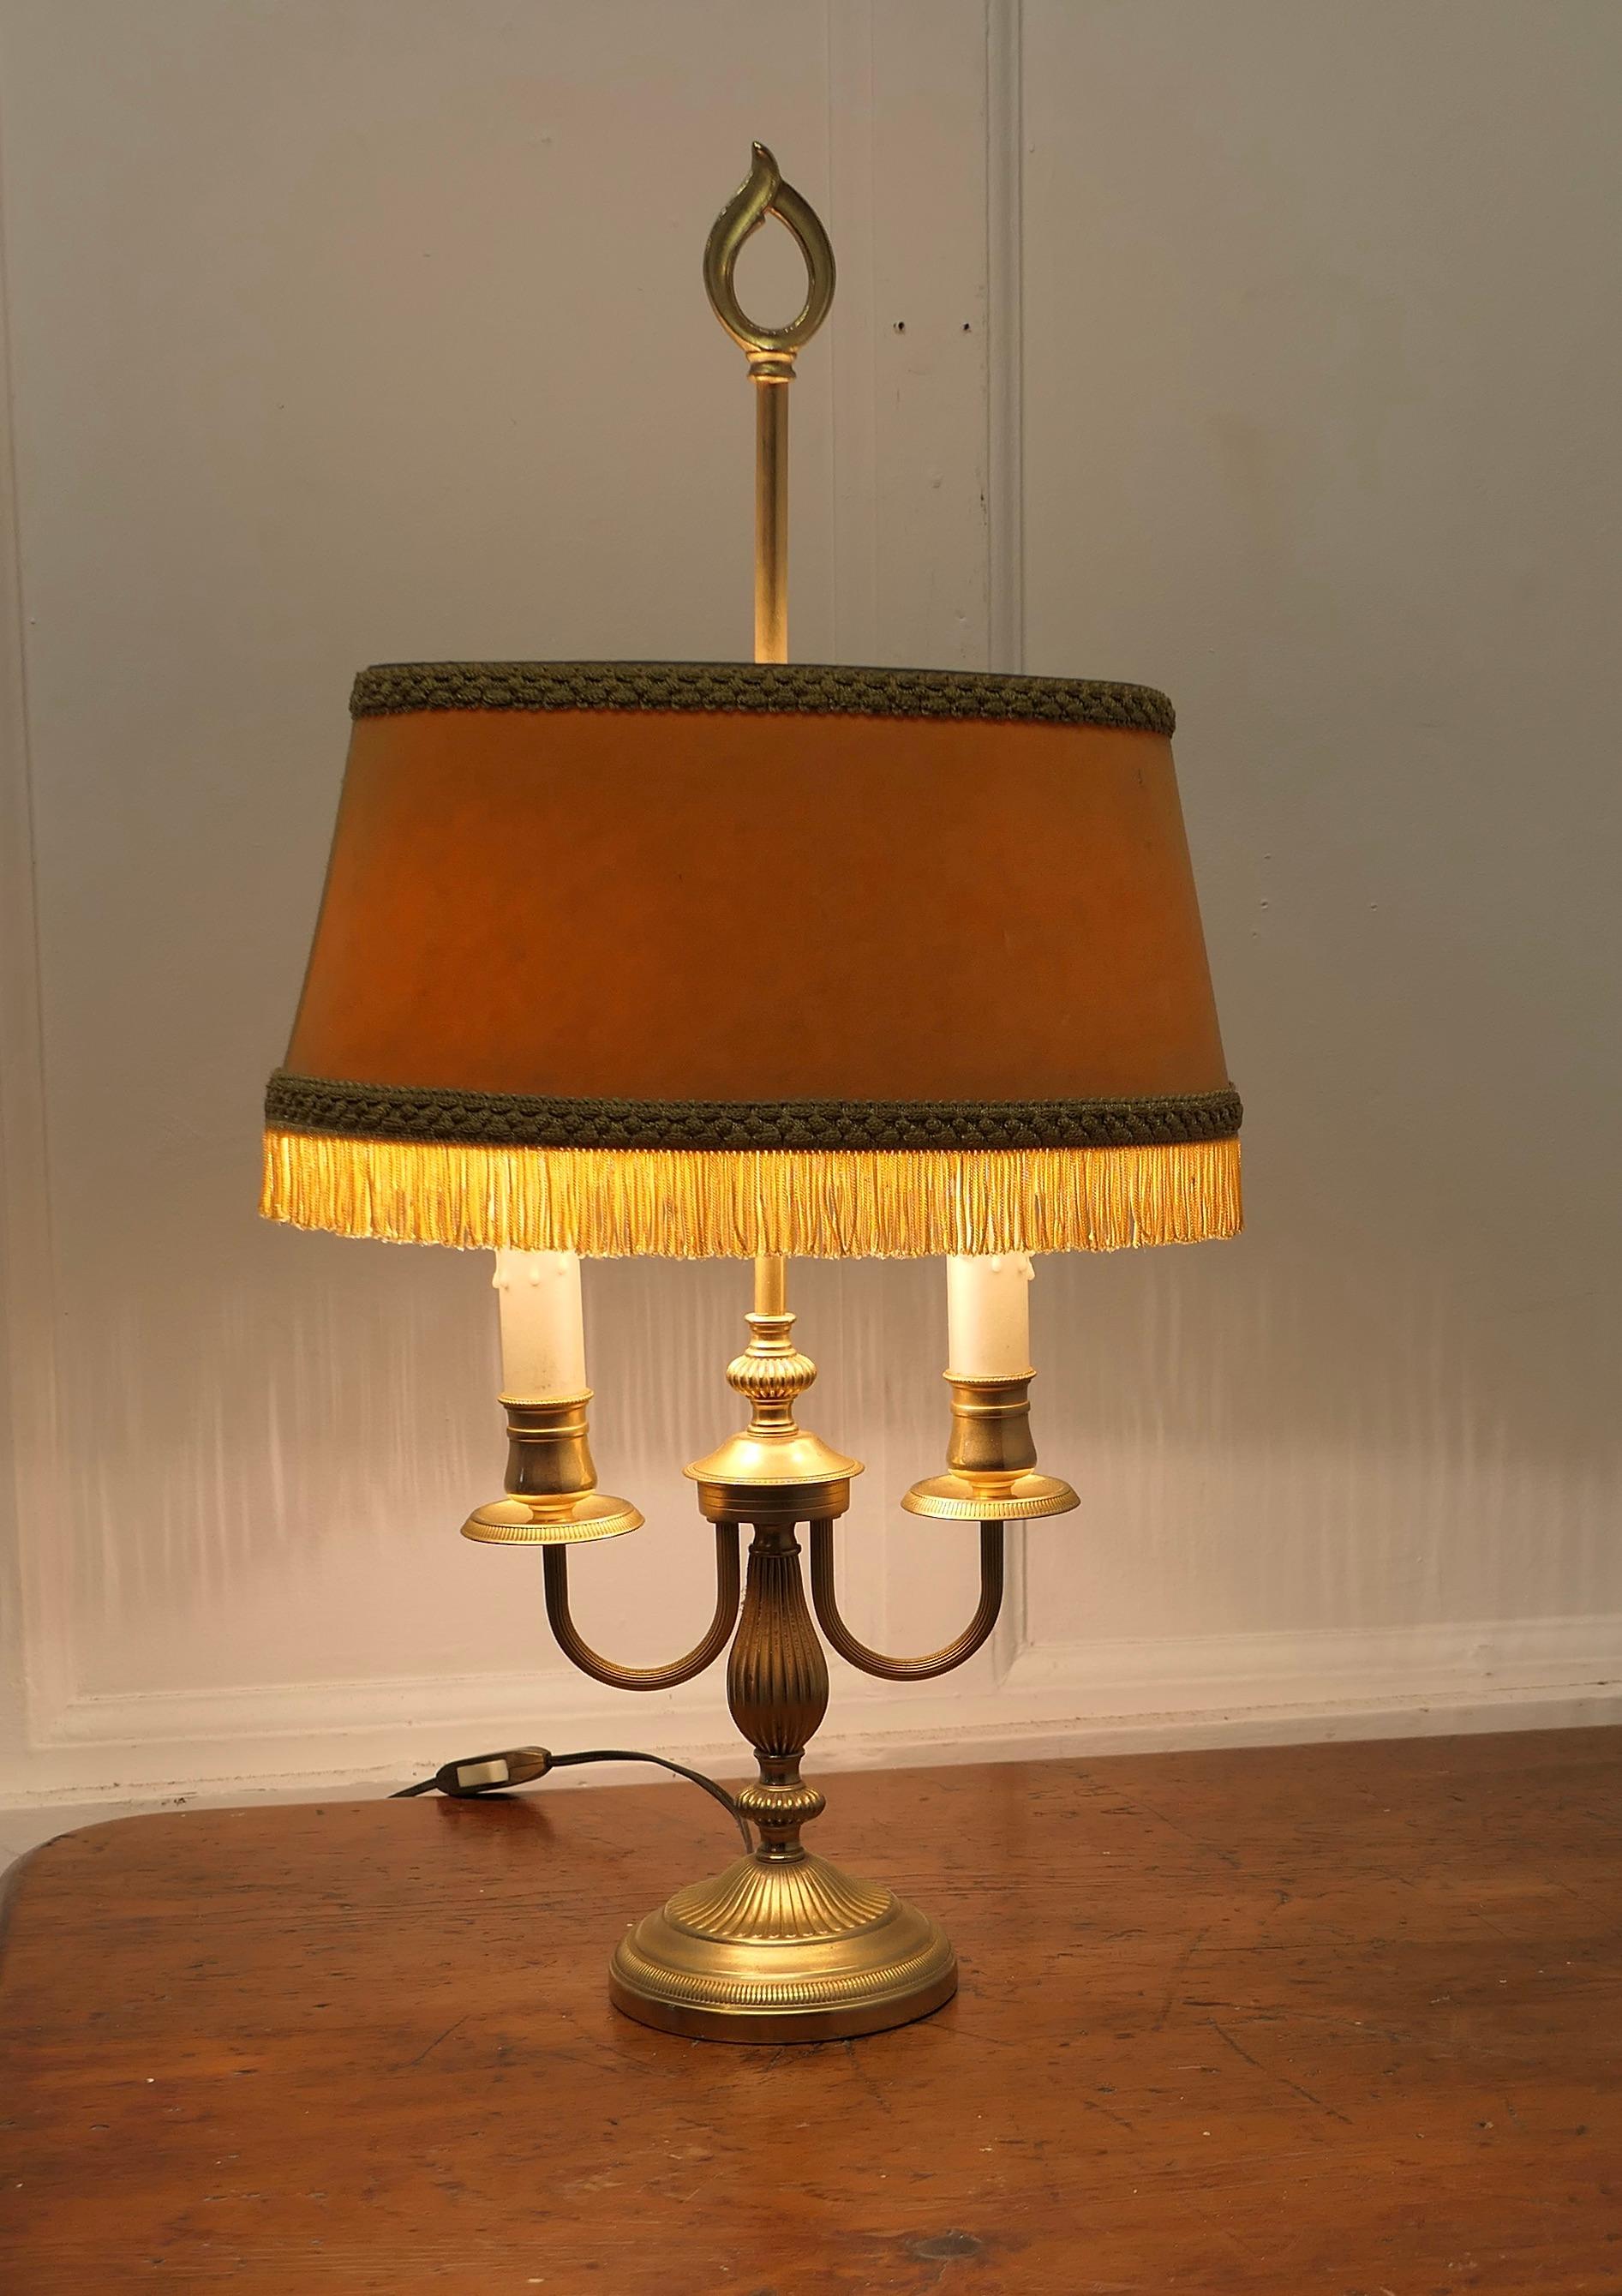 French Brass Bouillotte Twin Desk Lamp

A lovely piece, a brass twin sconce lamp with its original velvet fringed shade 
A  Very traditional design with two candles, the shade is original Gold Velvet
The lamp is all working and in good condition 